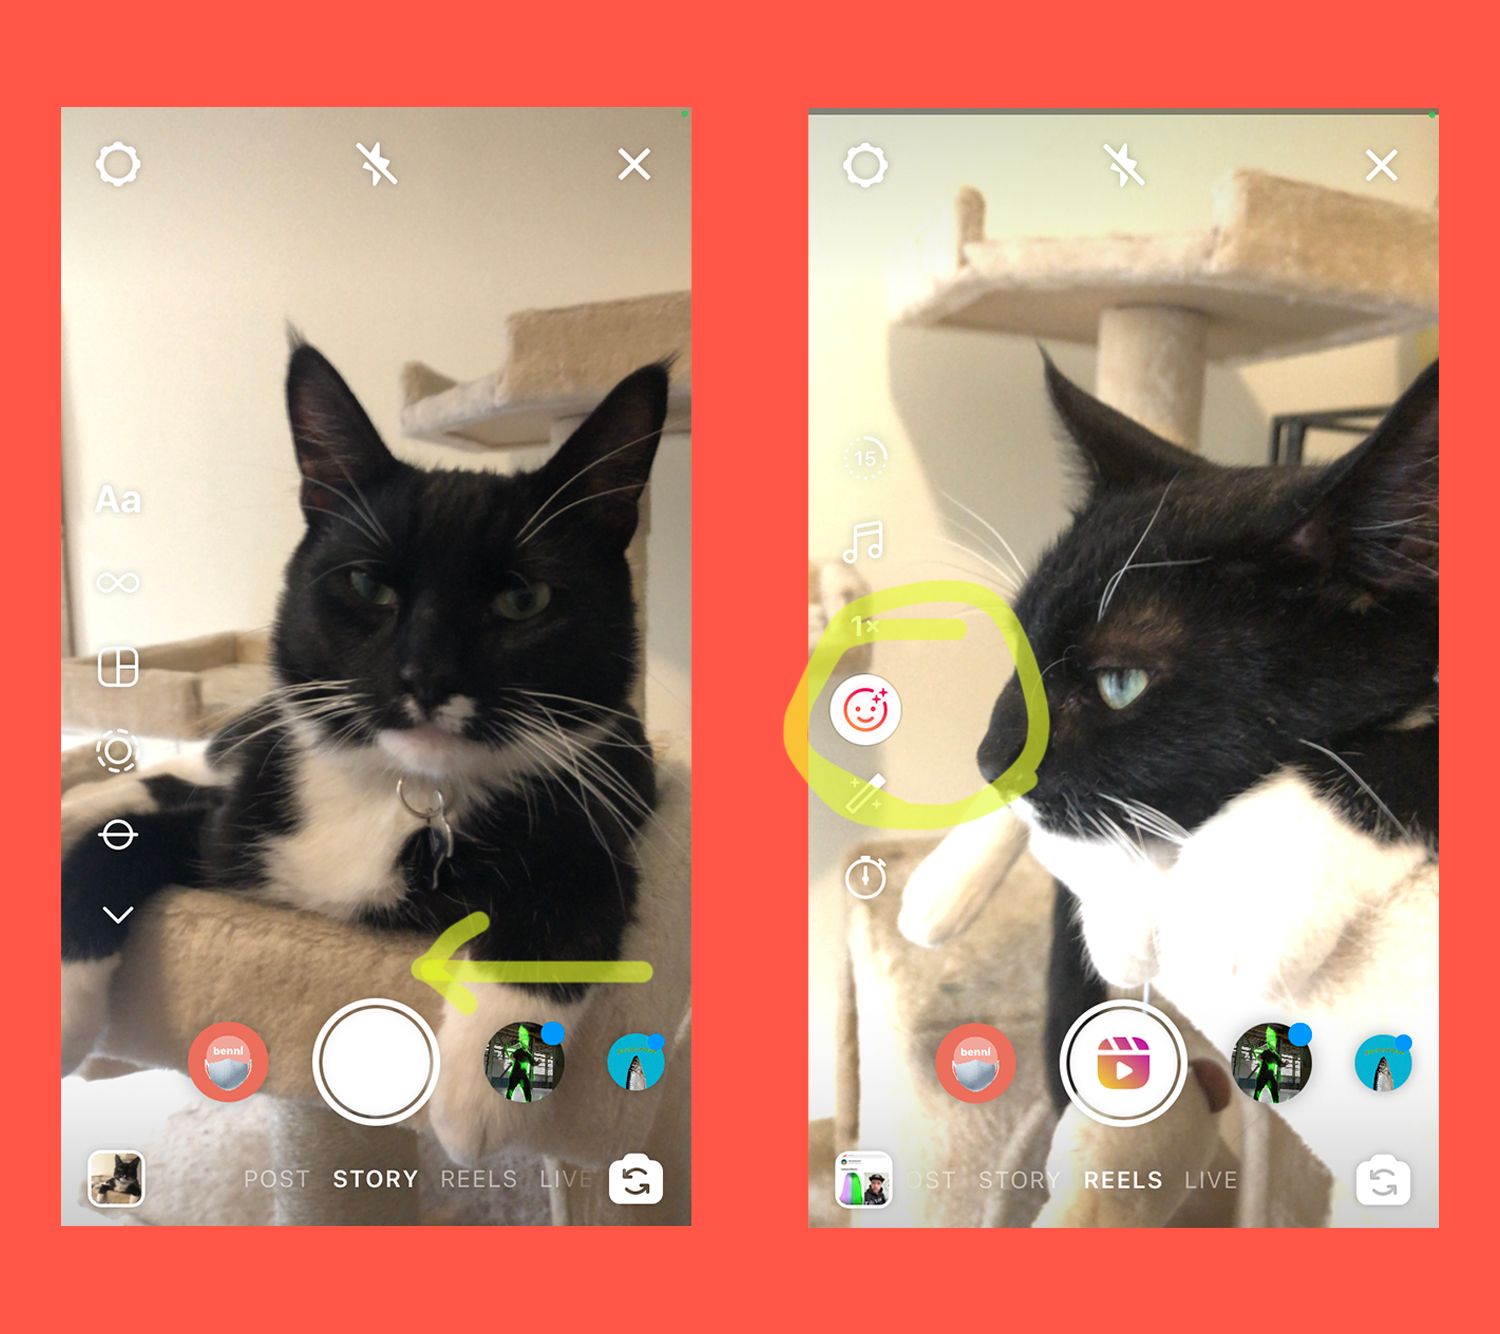 How To Use Benni's AR Filter on Instagram and Facebook